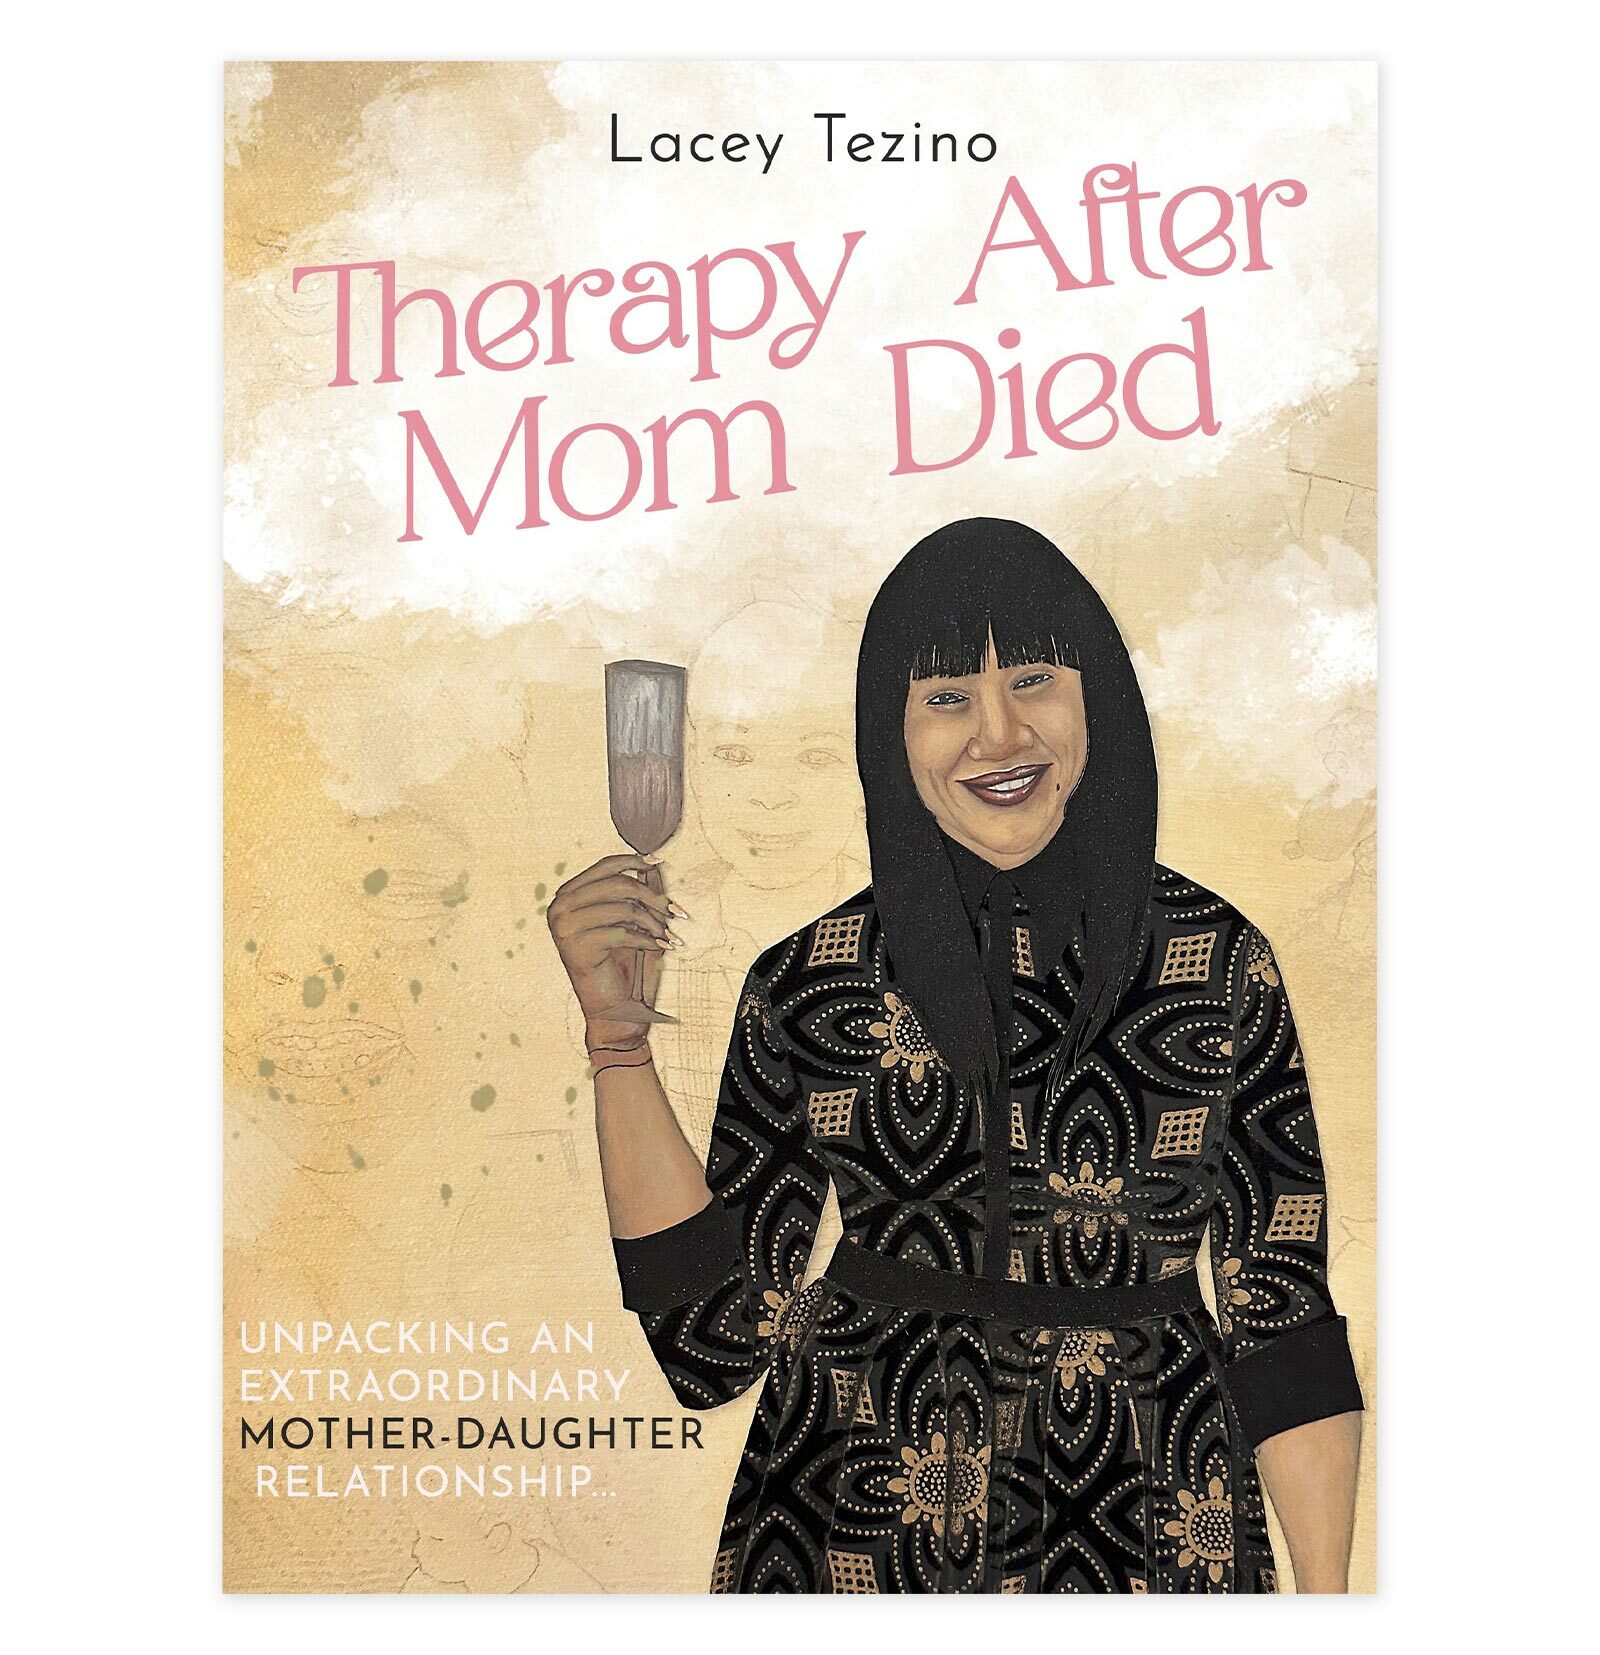 book cover showing an illustration of a Woman holding a glass of Champagne and smiling